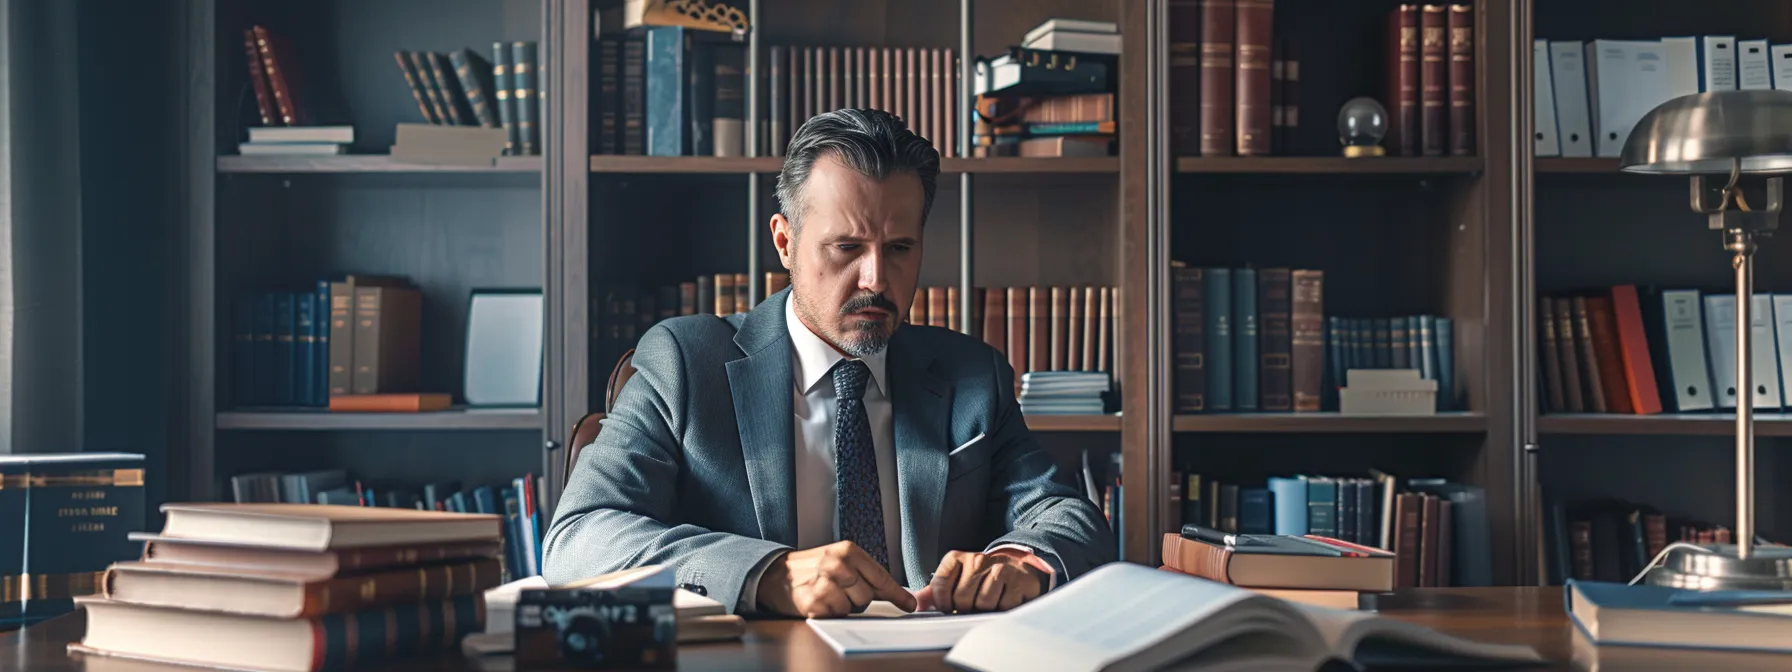 a lawyer in a miami office with books and legal documents scattered on a desk.